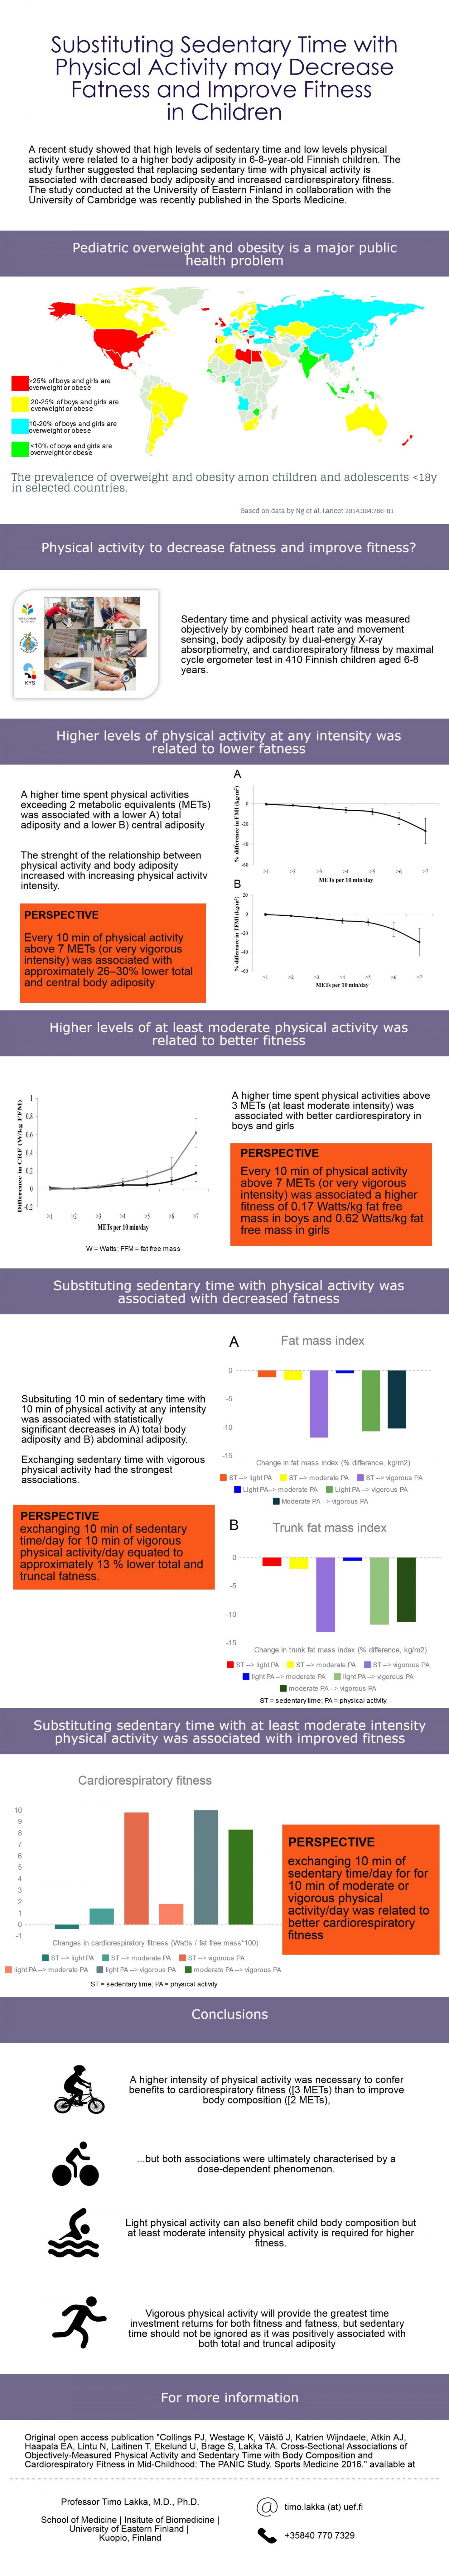 Physical Activity, Fatness and Fitness